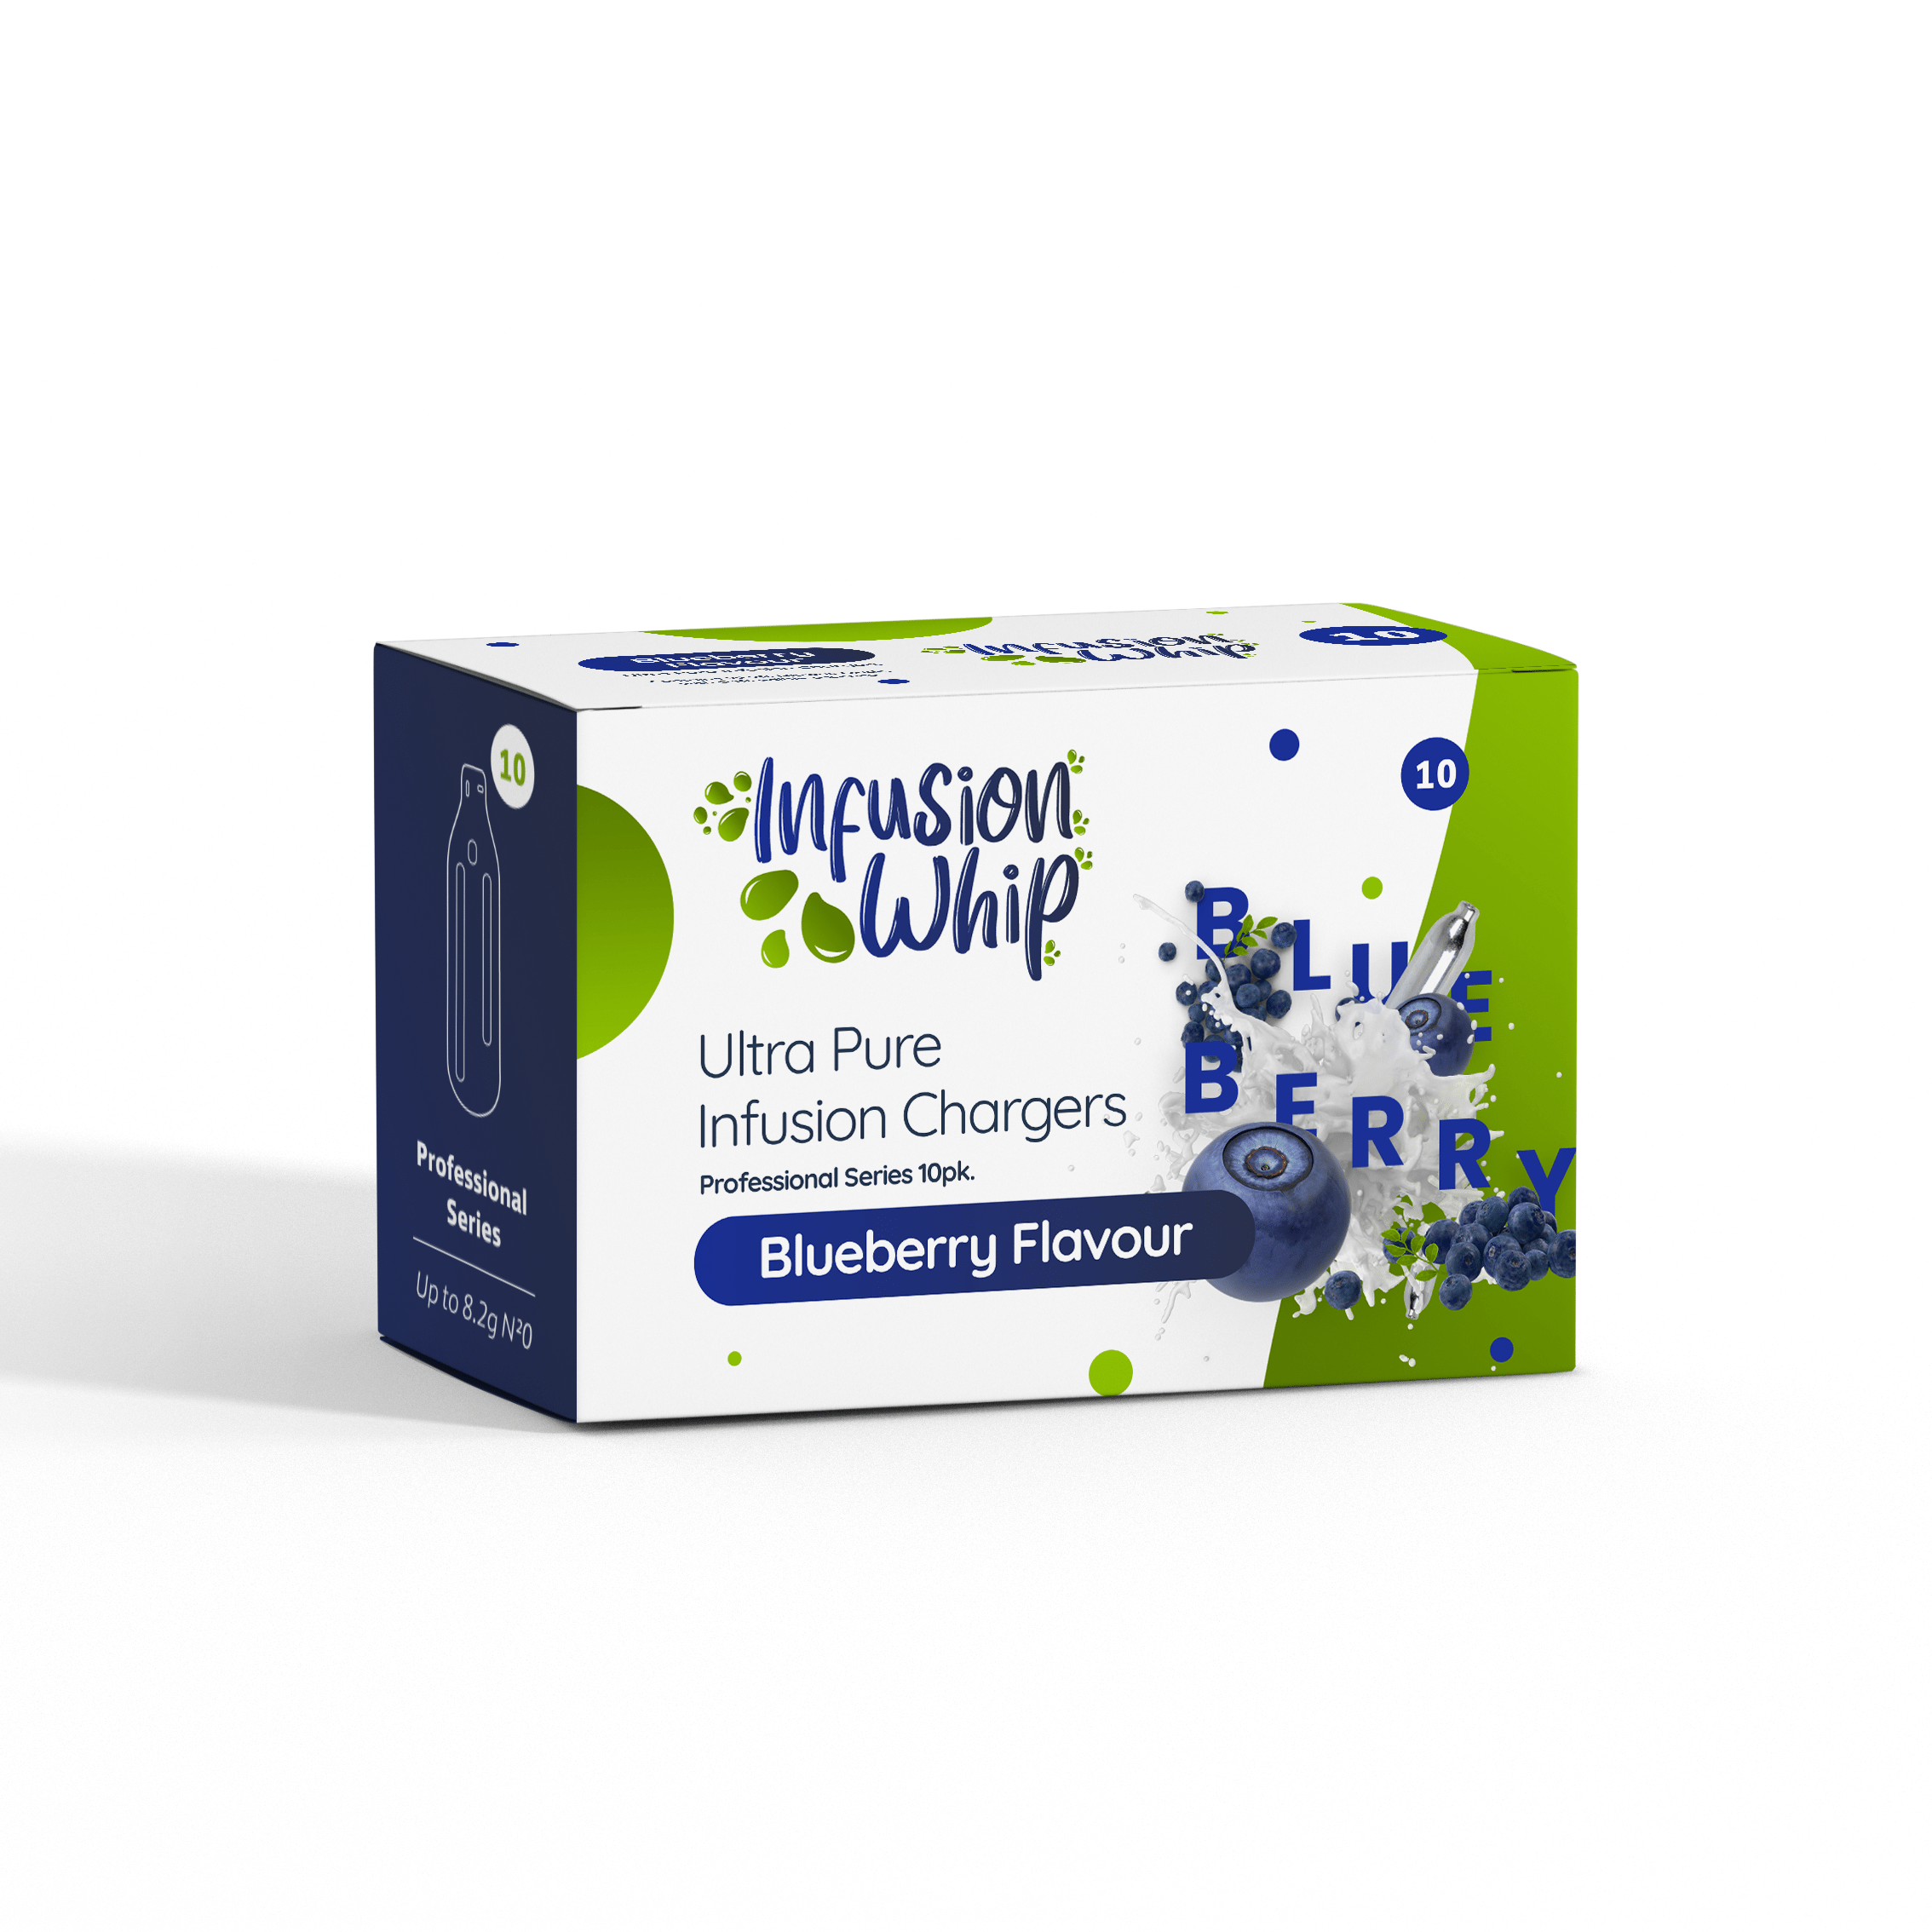 New Infusionwhip Blueberry Infusion Chargers 8.2g - 10pks